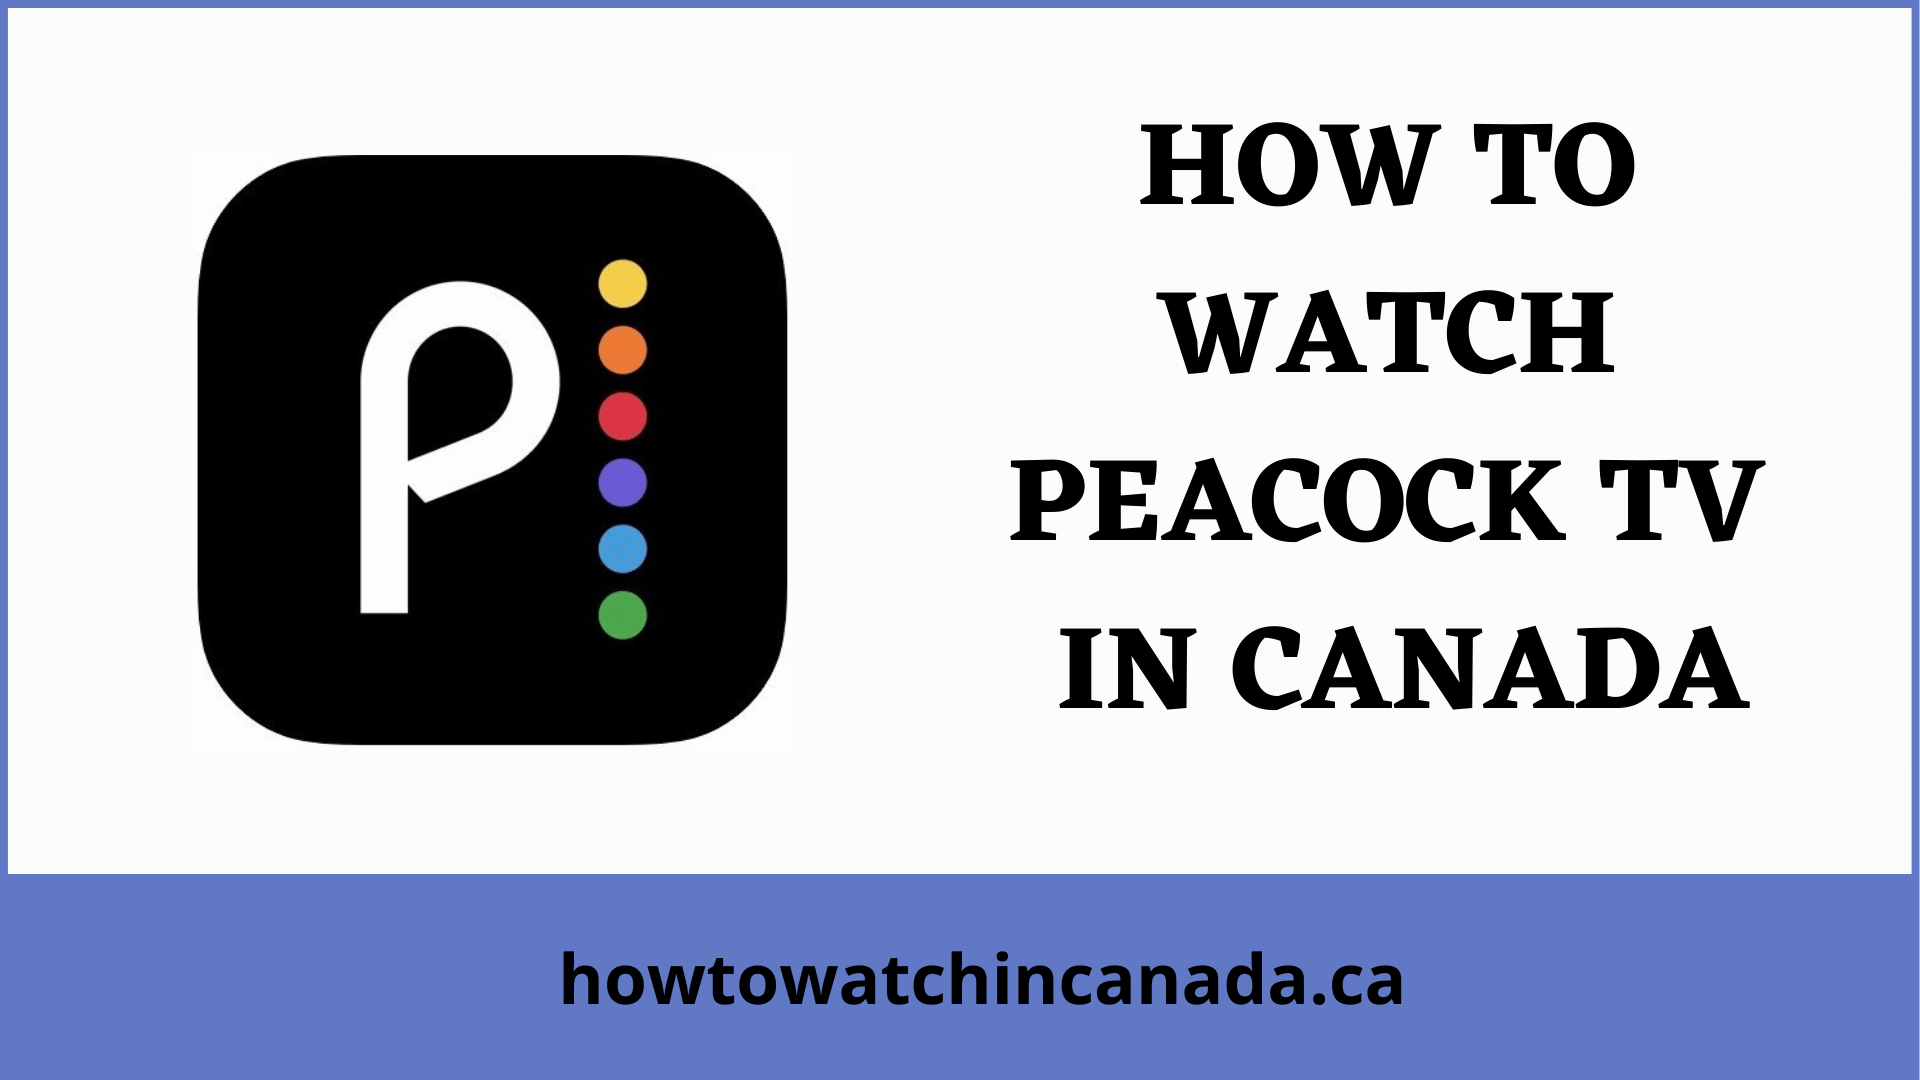 peacock-tv-feat-how-to-watch-in-canada